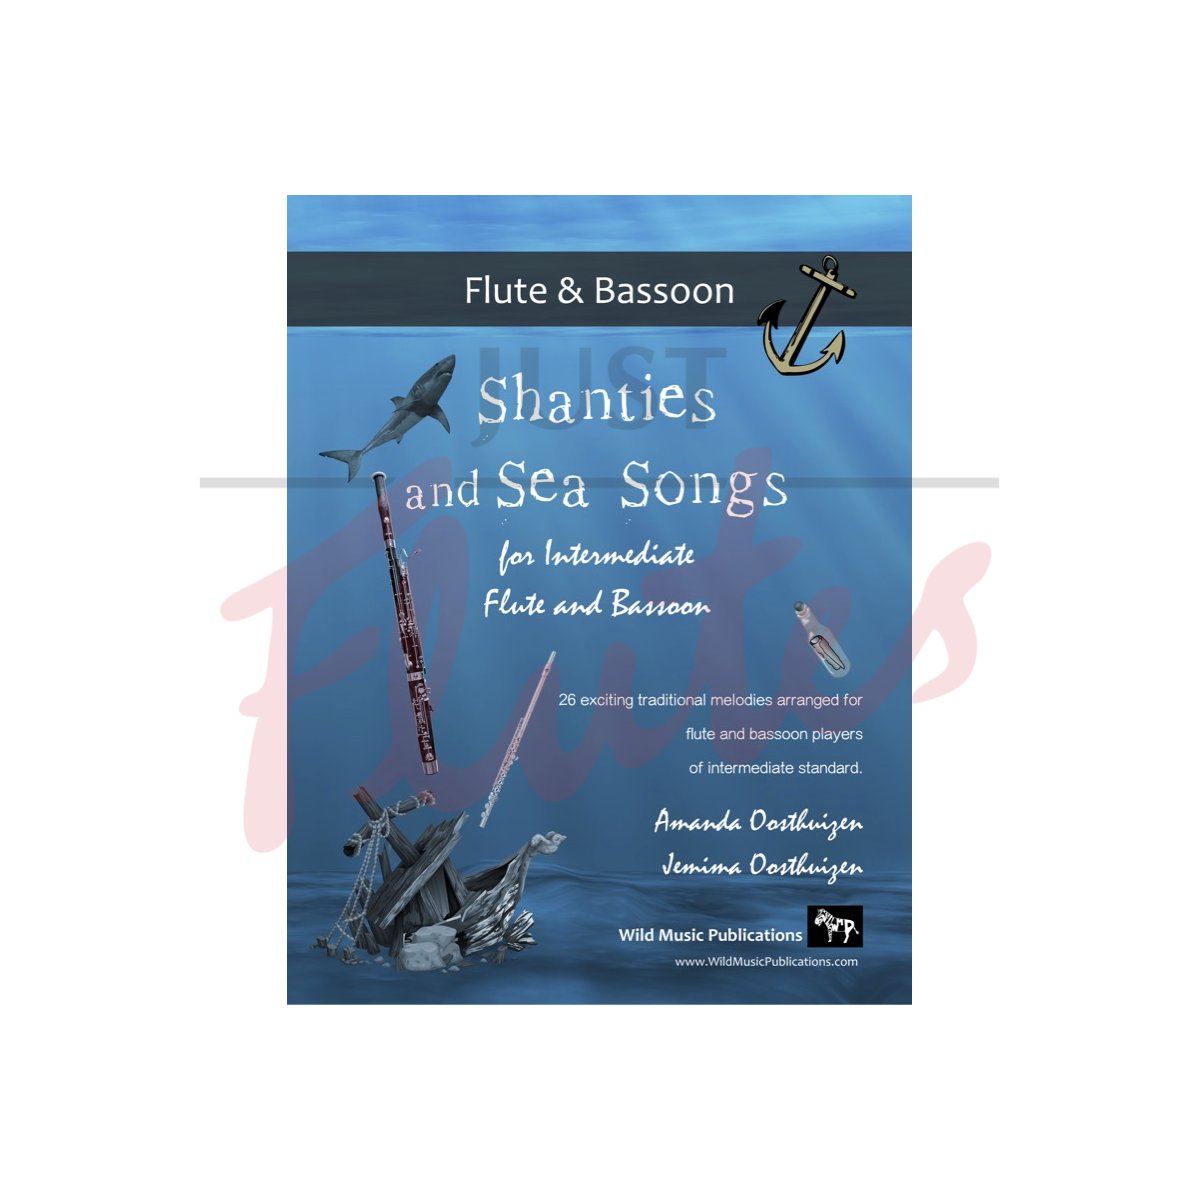 Shanties and Sea Songs for Intermediate Flute and Bassoon